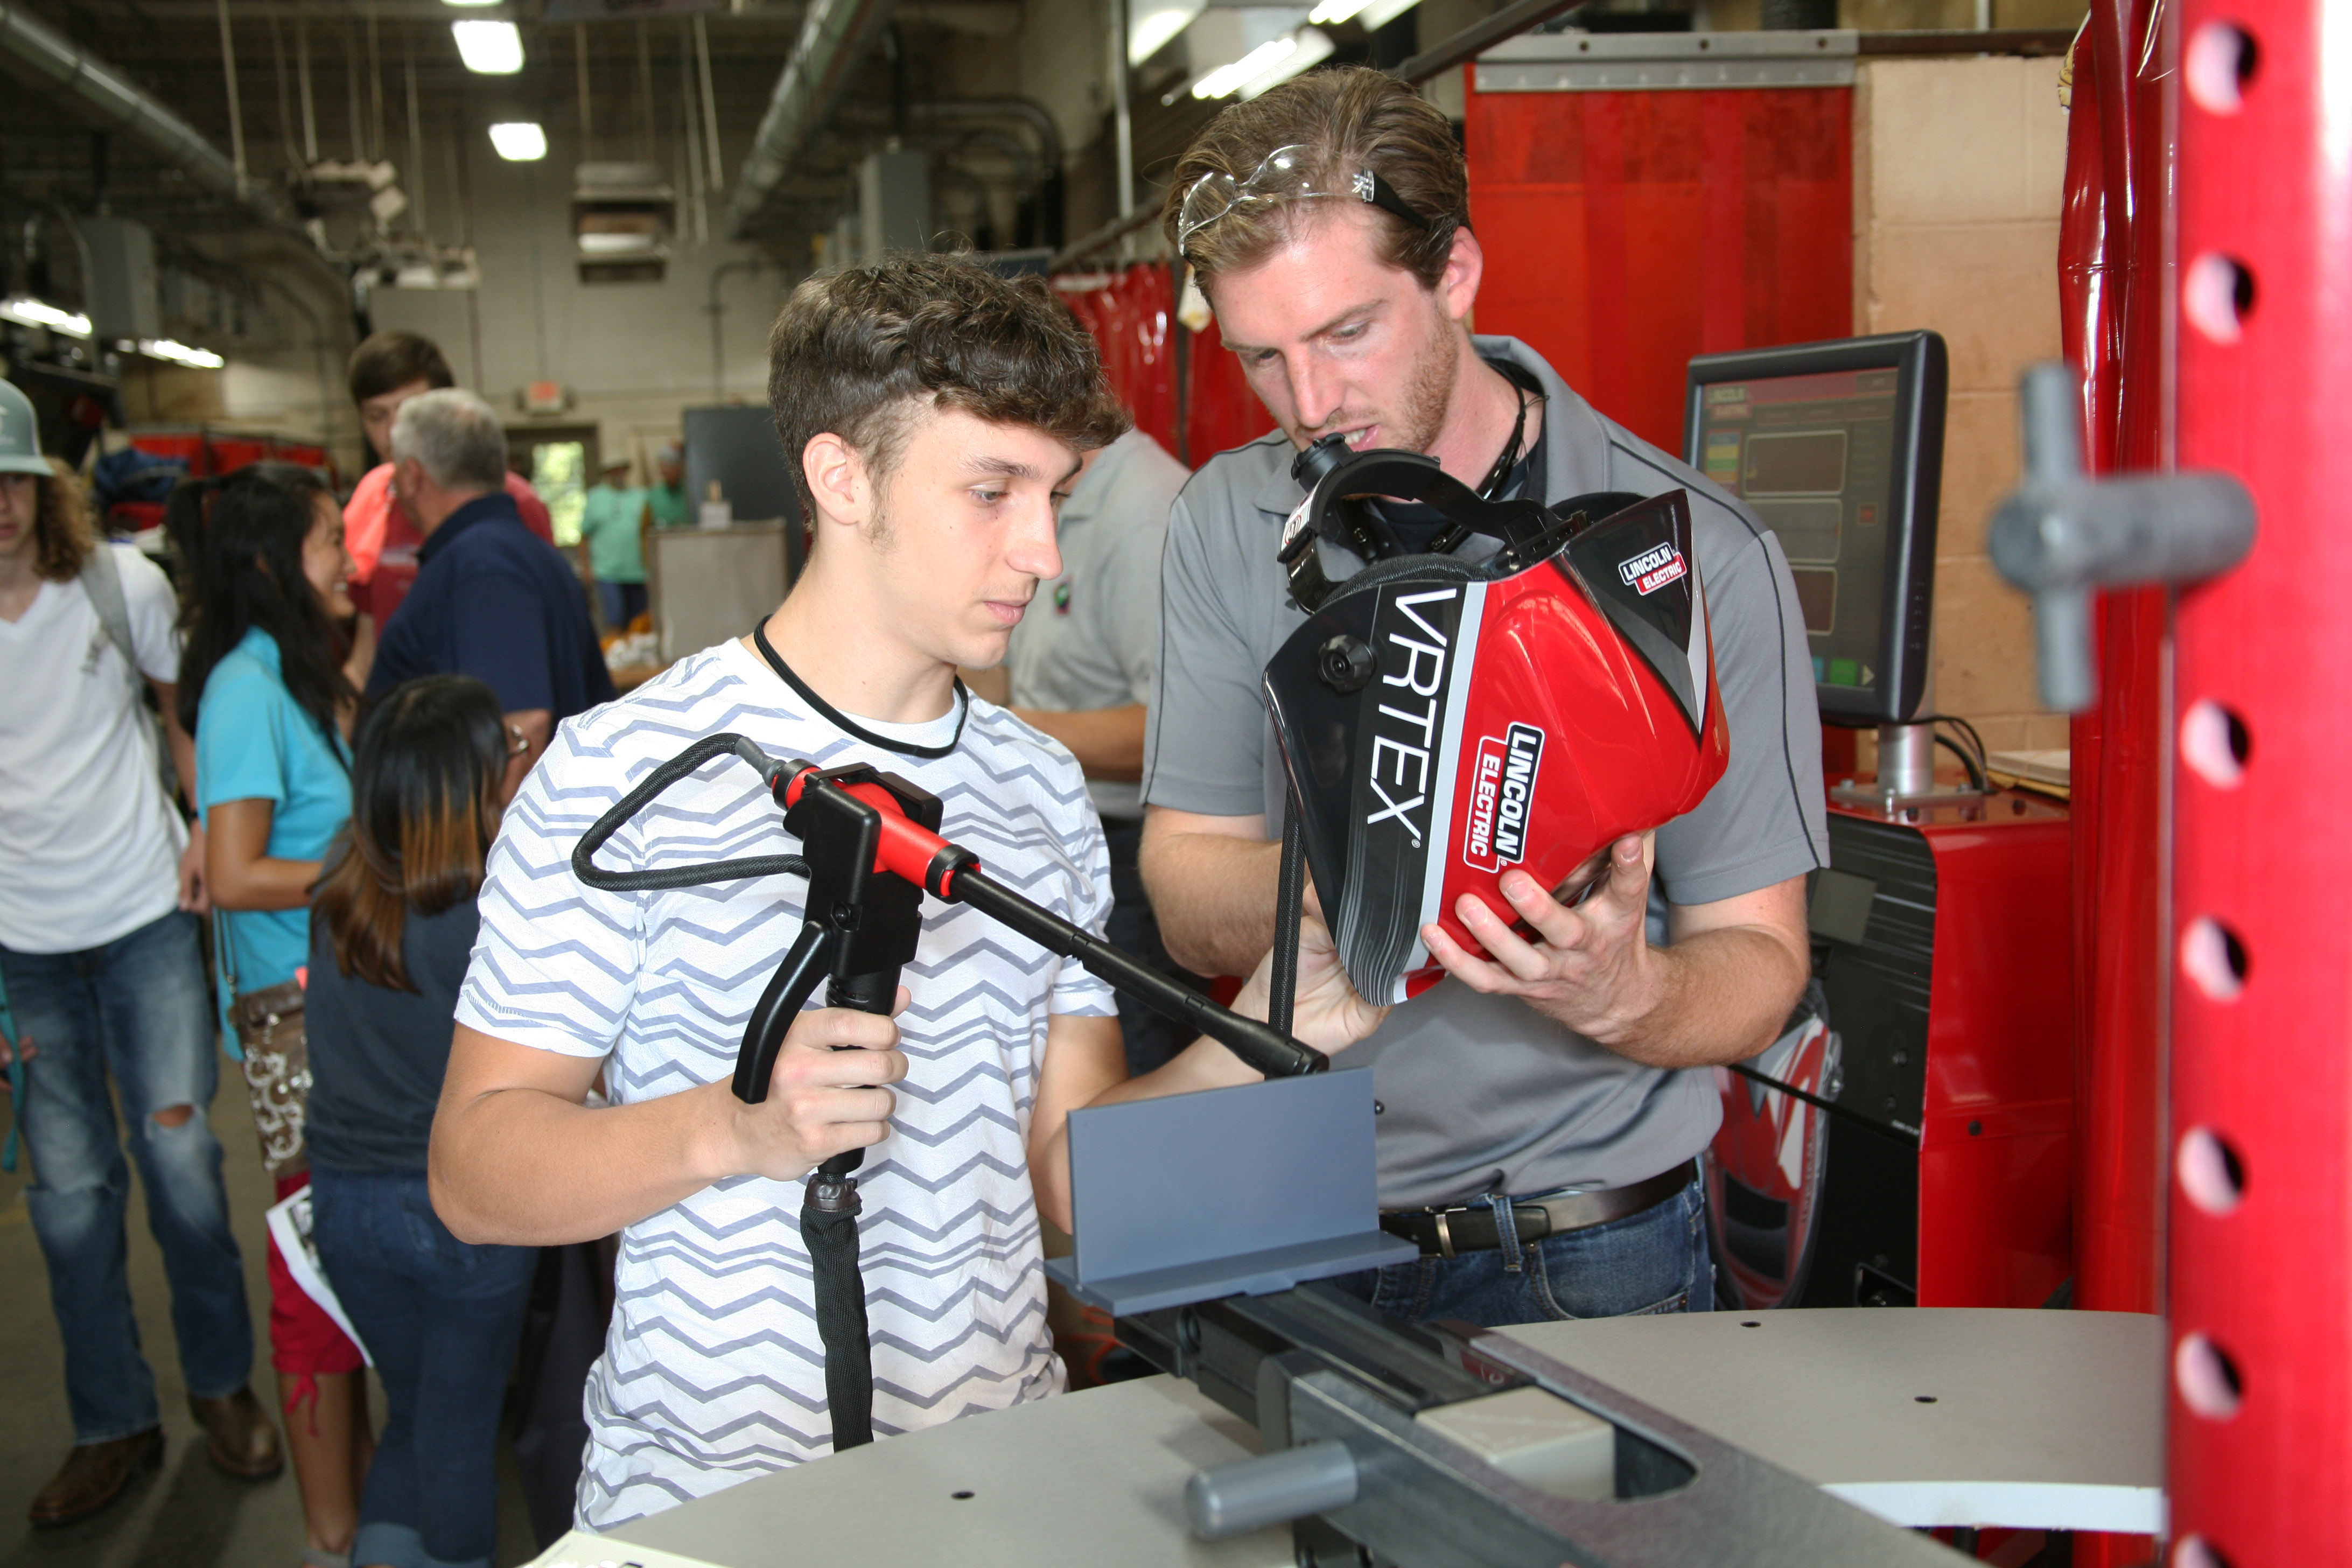 Curt Metz (right) of Lincoln Electric, goes over the welding simulator with Kaleb Brondaway (left) of Rome High School.